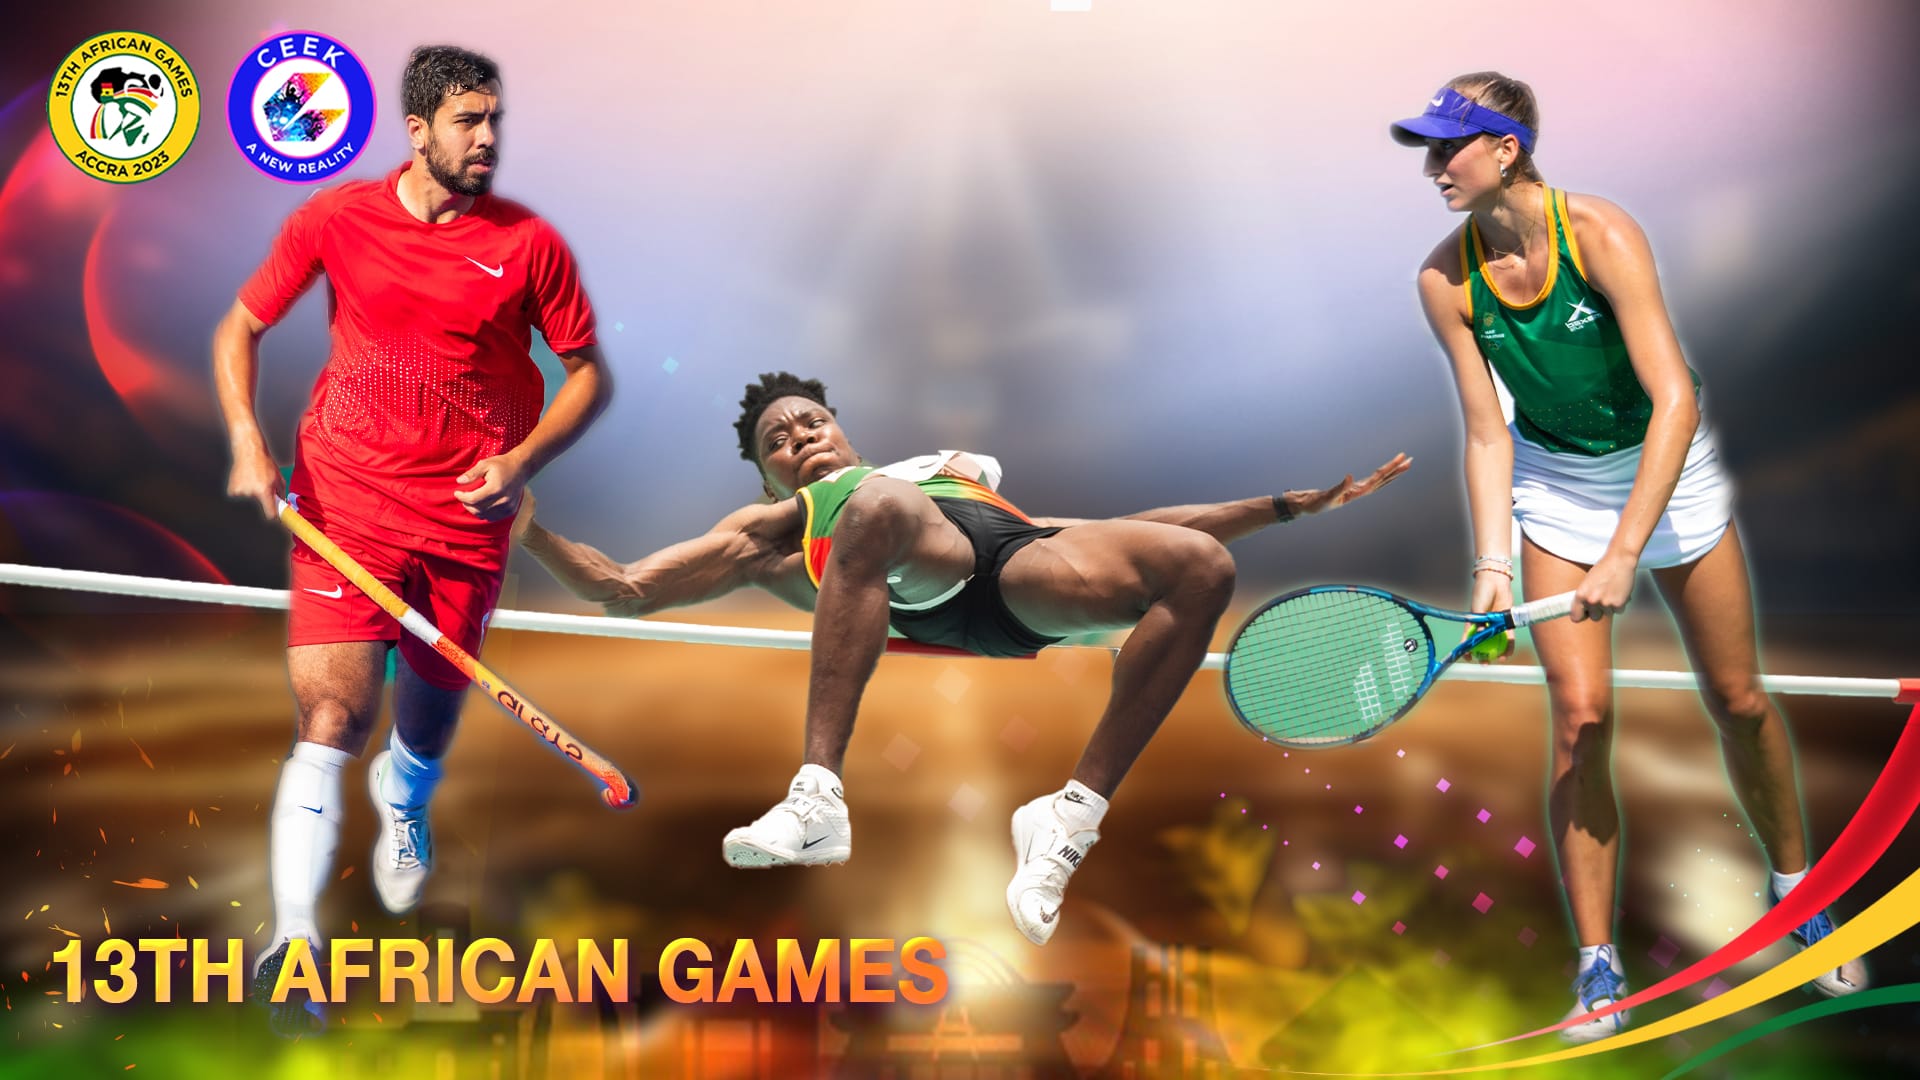 Accra African Games 22nd March